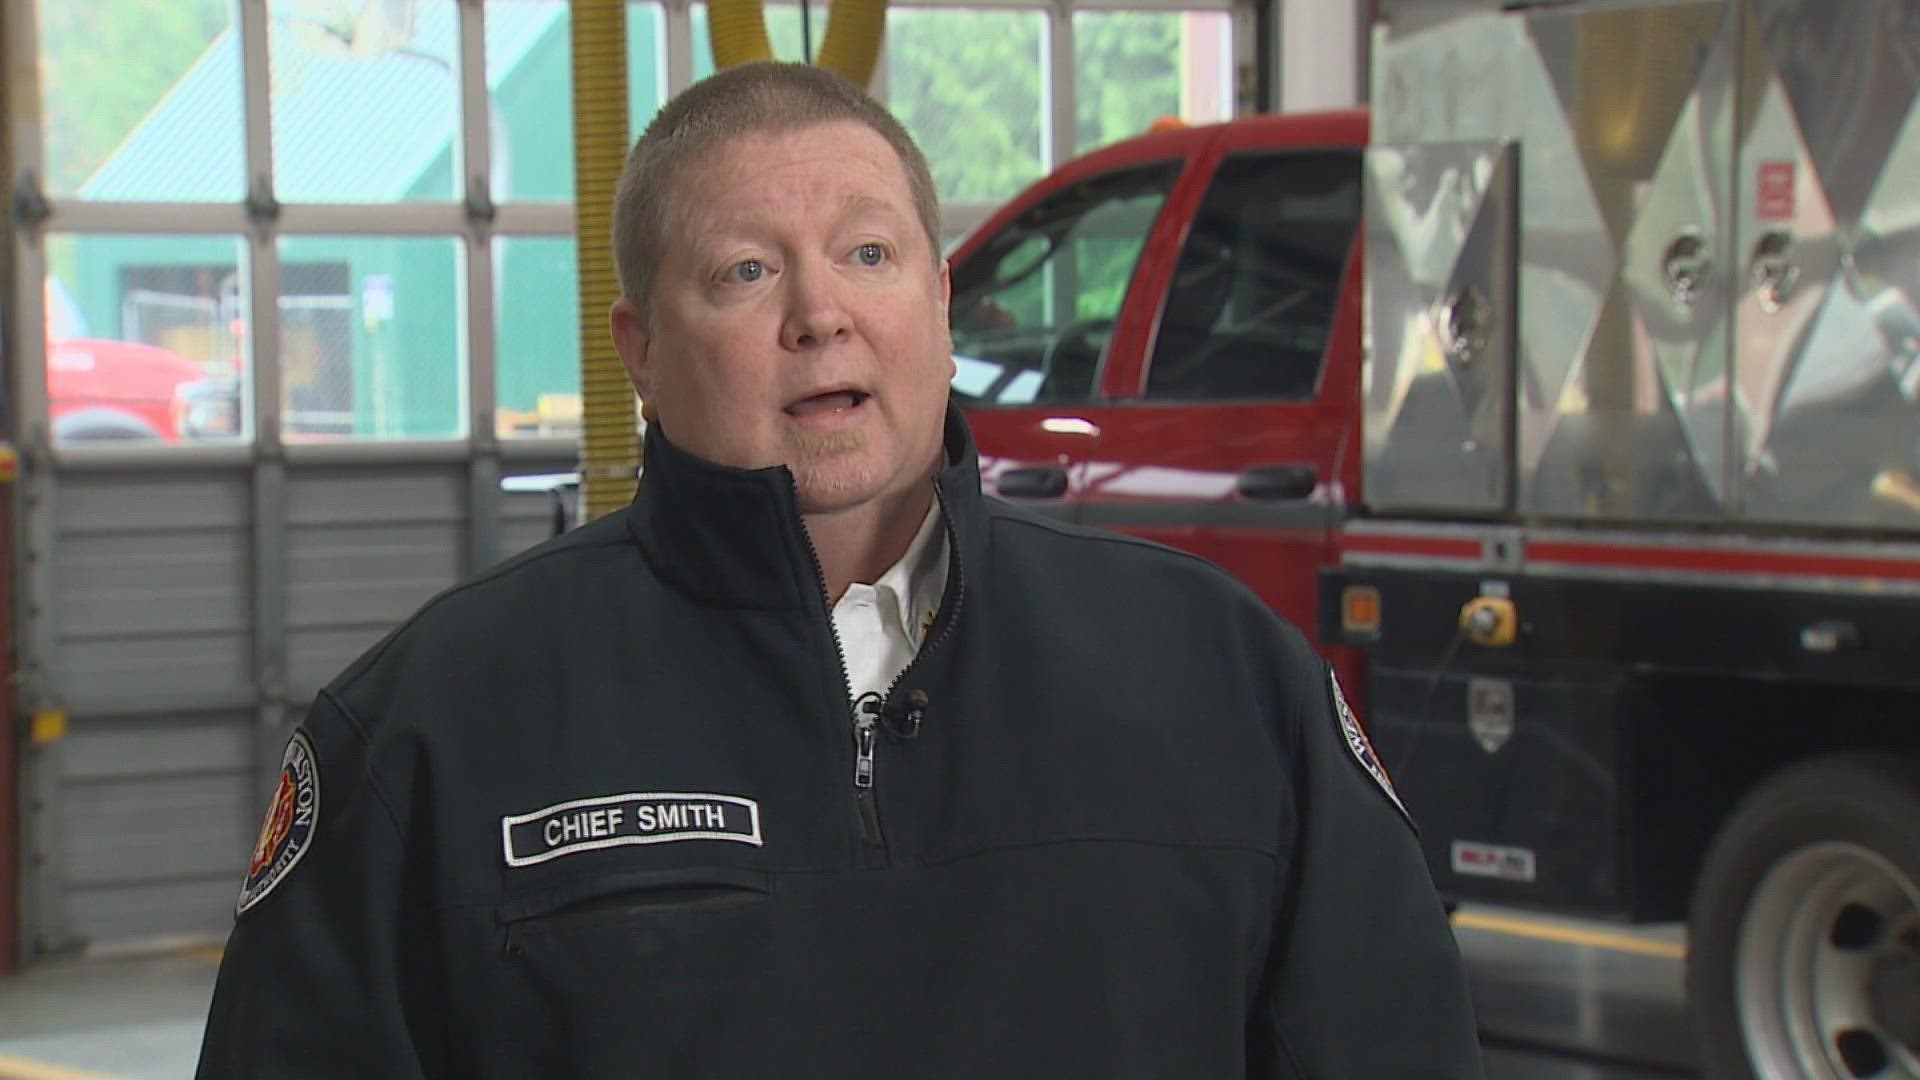 The chief says more than half of the agency's firefighters will be laid off if two west Thurston County fire levies end up failing to pass.